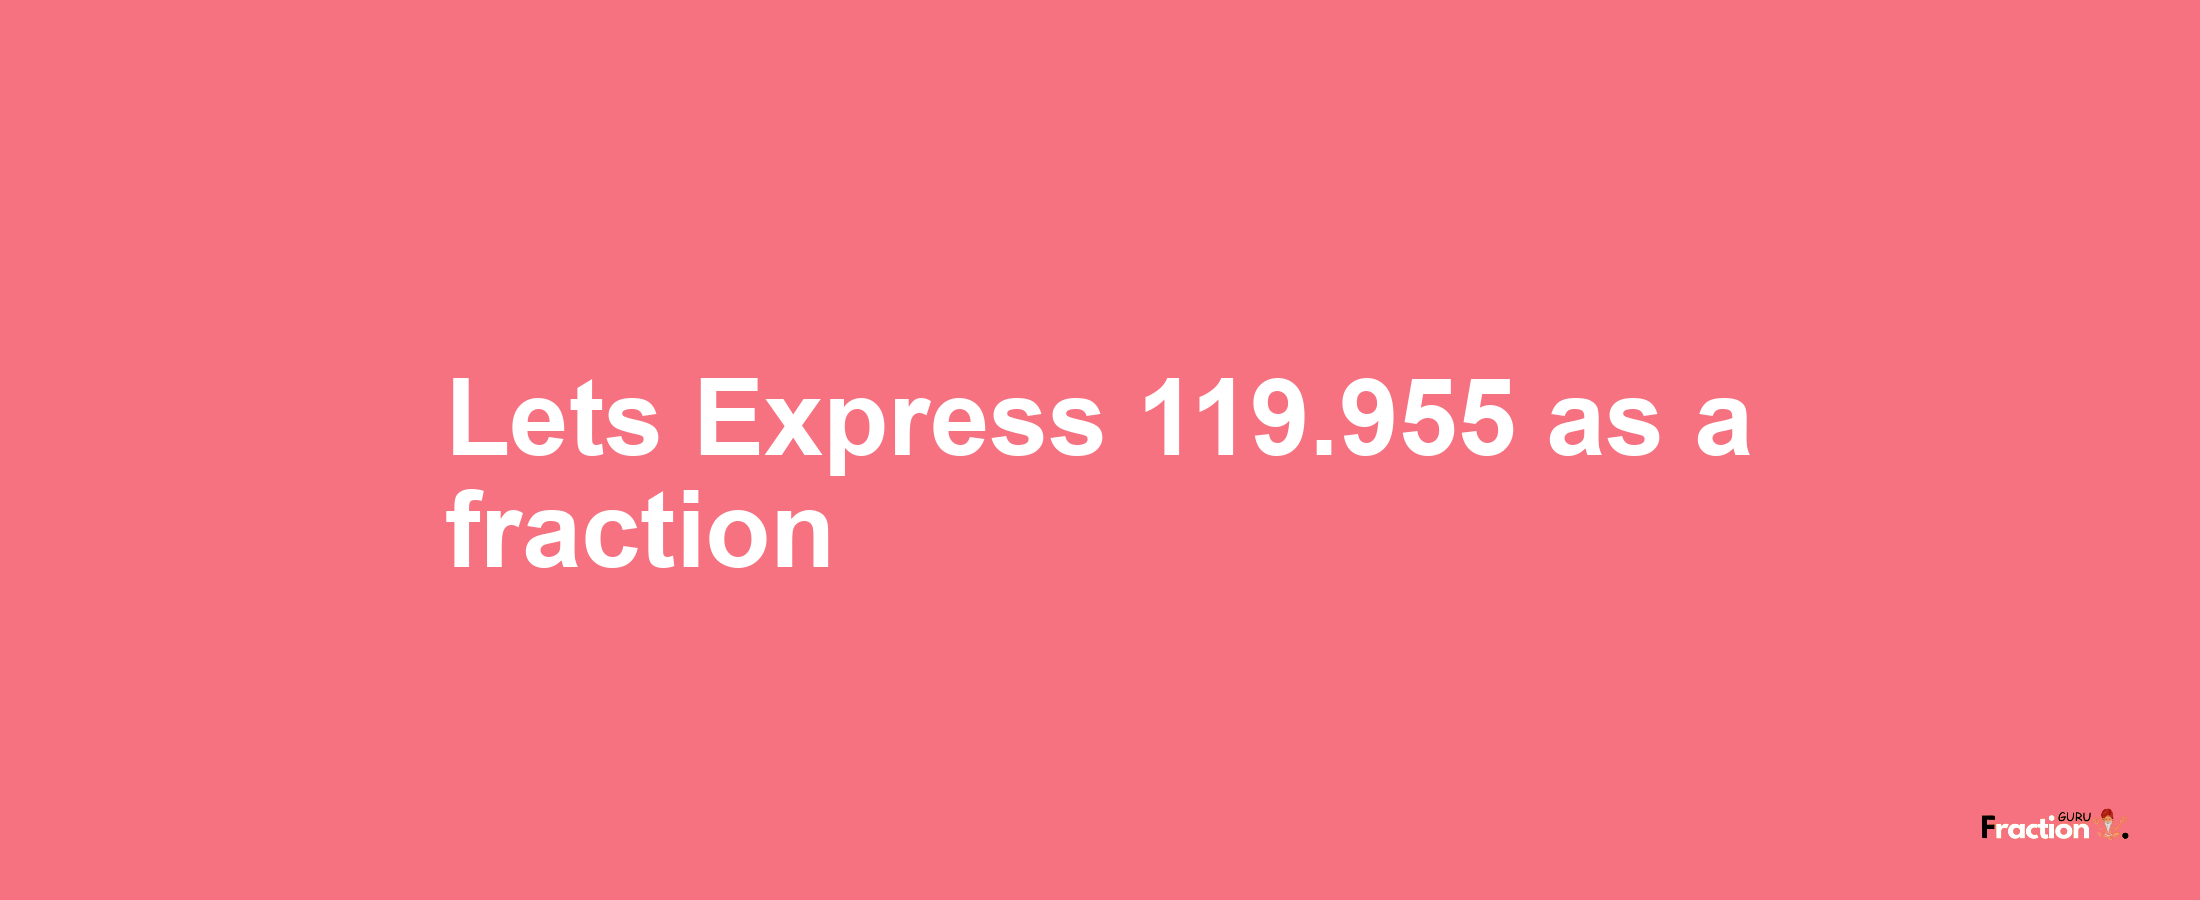 Lets Express 119.955 as afraction